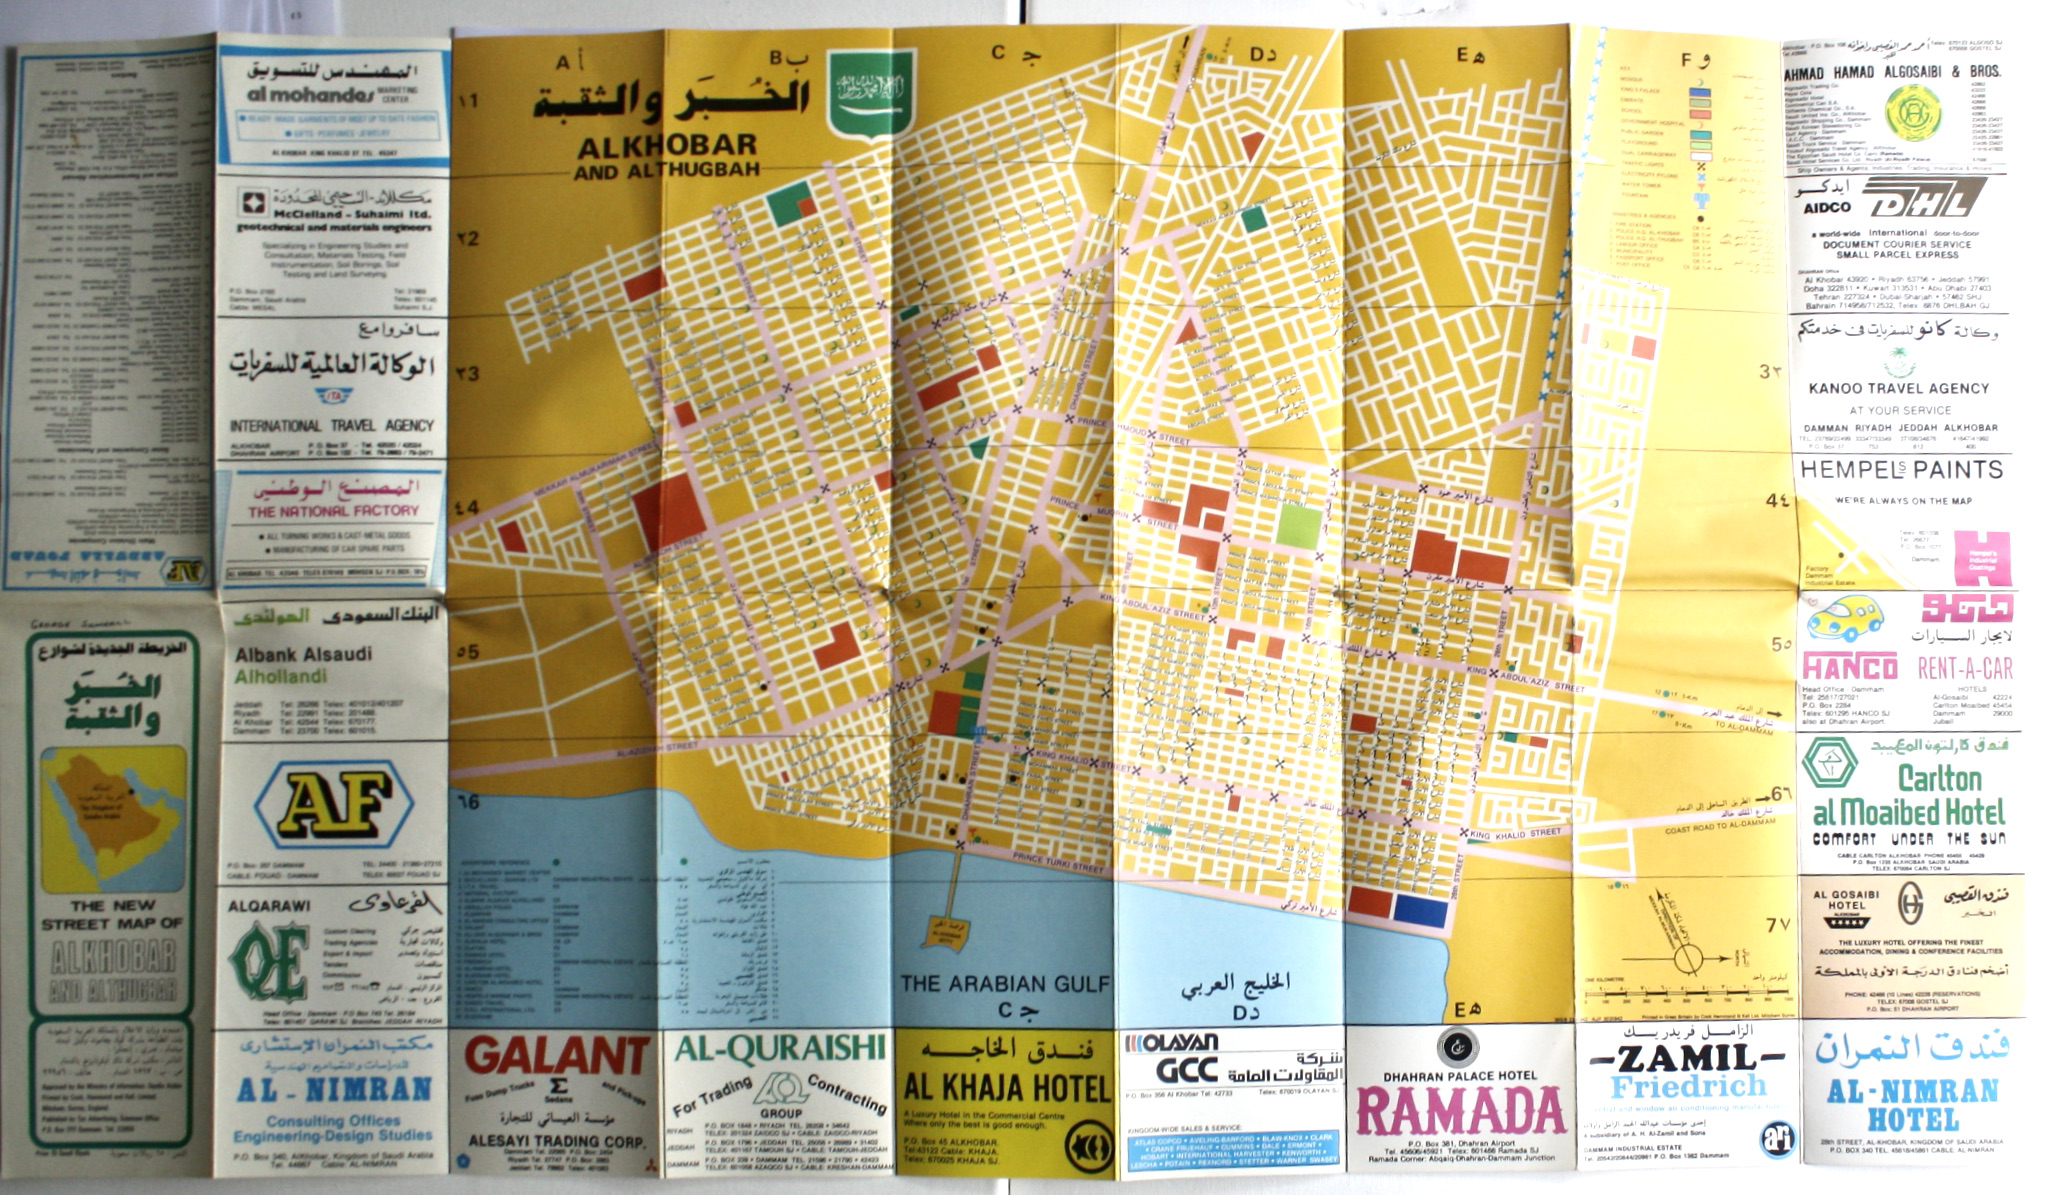 The New Street Map of Al Khobar and Al Thugbar (Approved by the ...